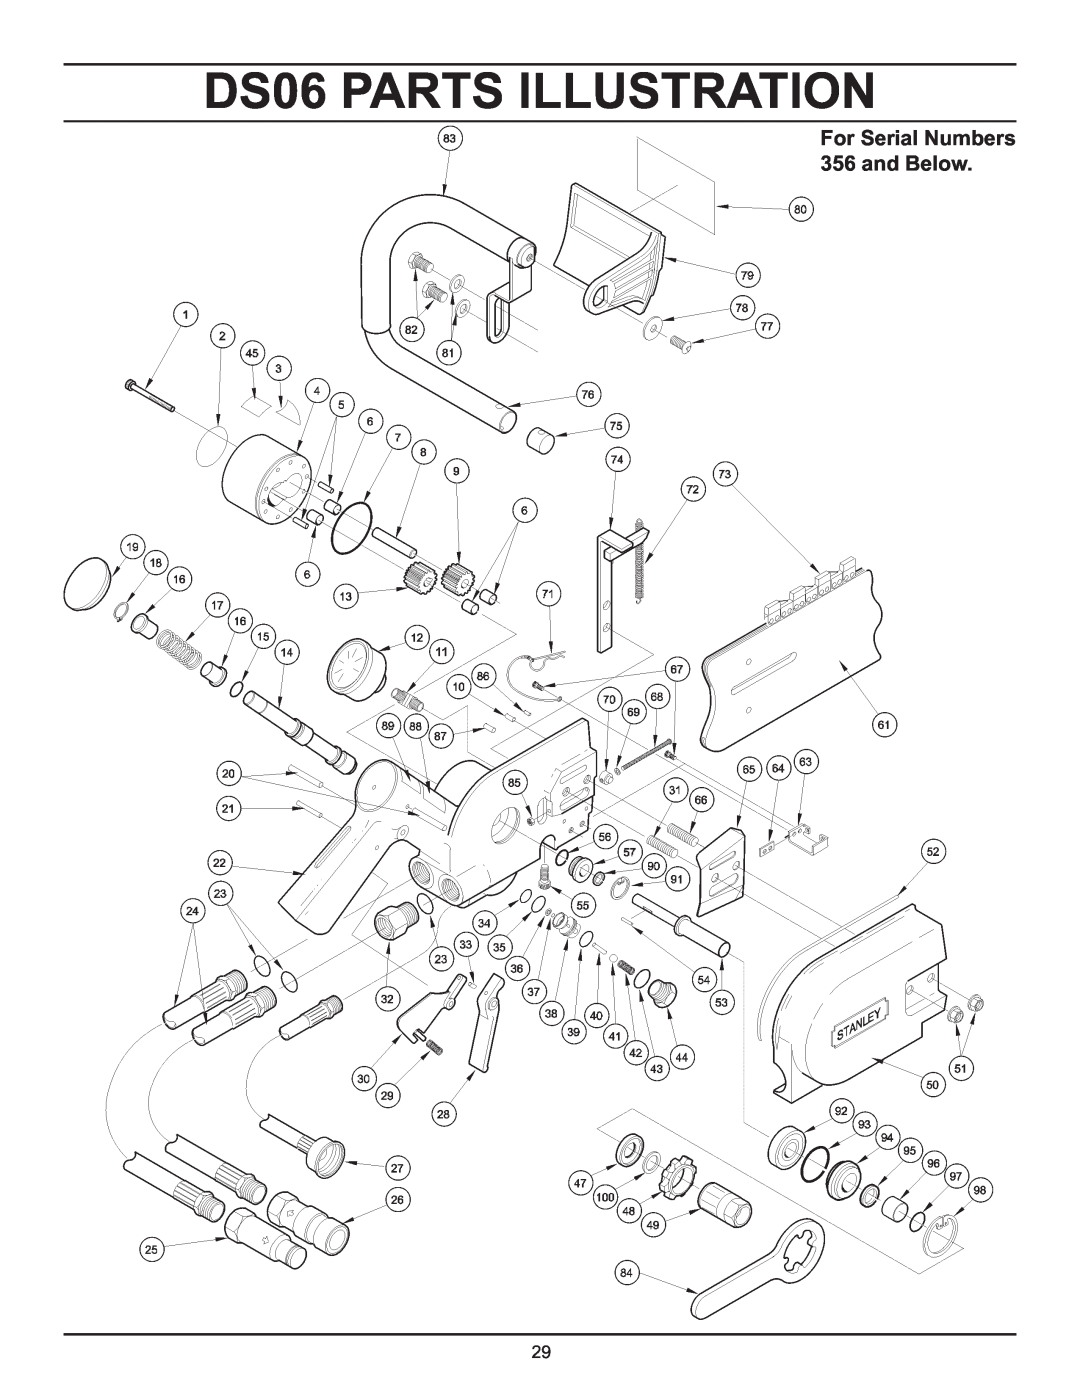 Stanley Black & Decker manual For Serial Numbers 356 and Below, DS06 PARTS ILLUSTRATION 